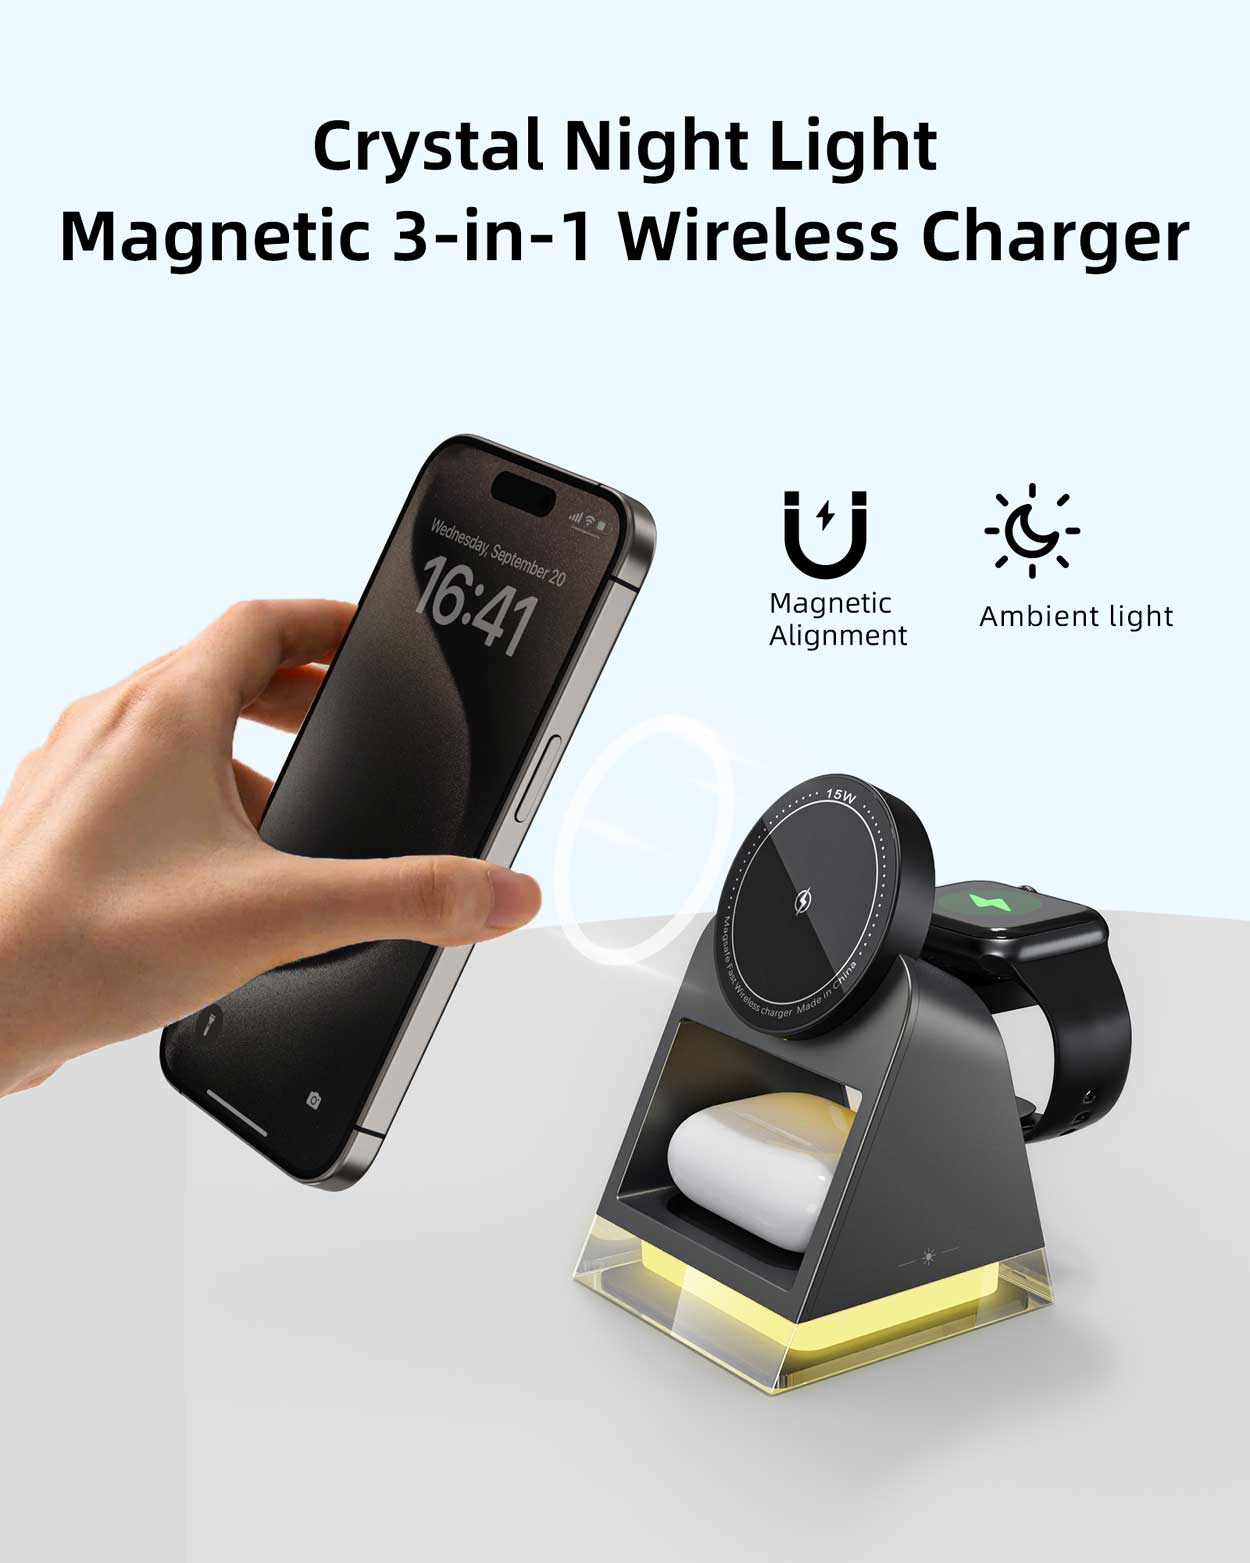 3-in-1 Magnetic Wireless Charging Station with Night Light - 4